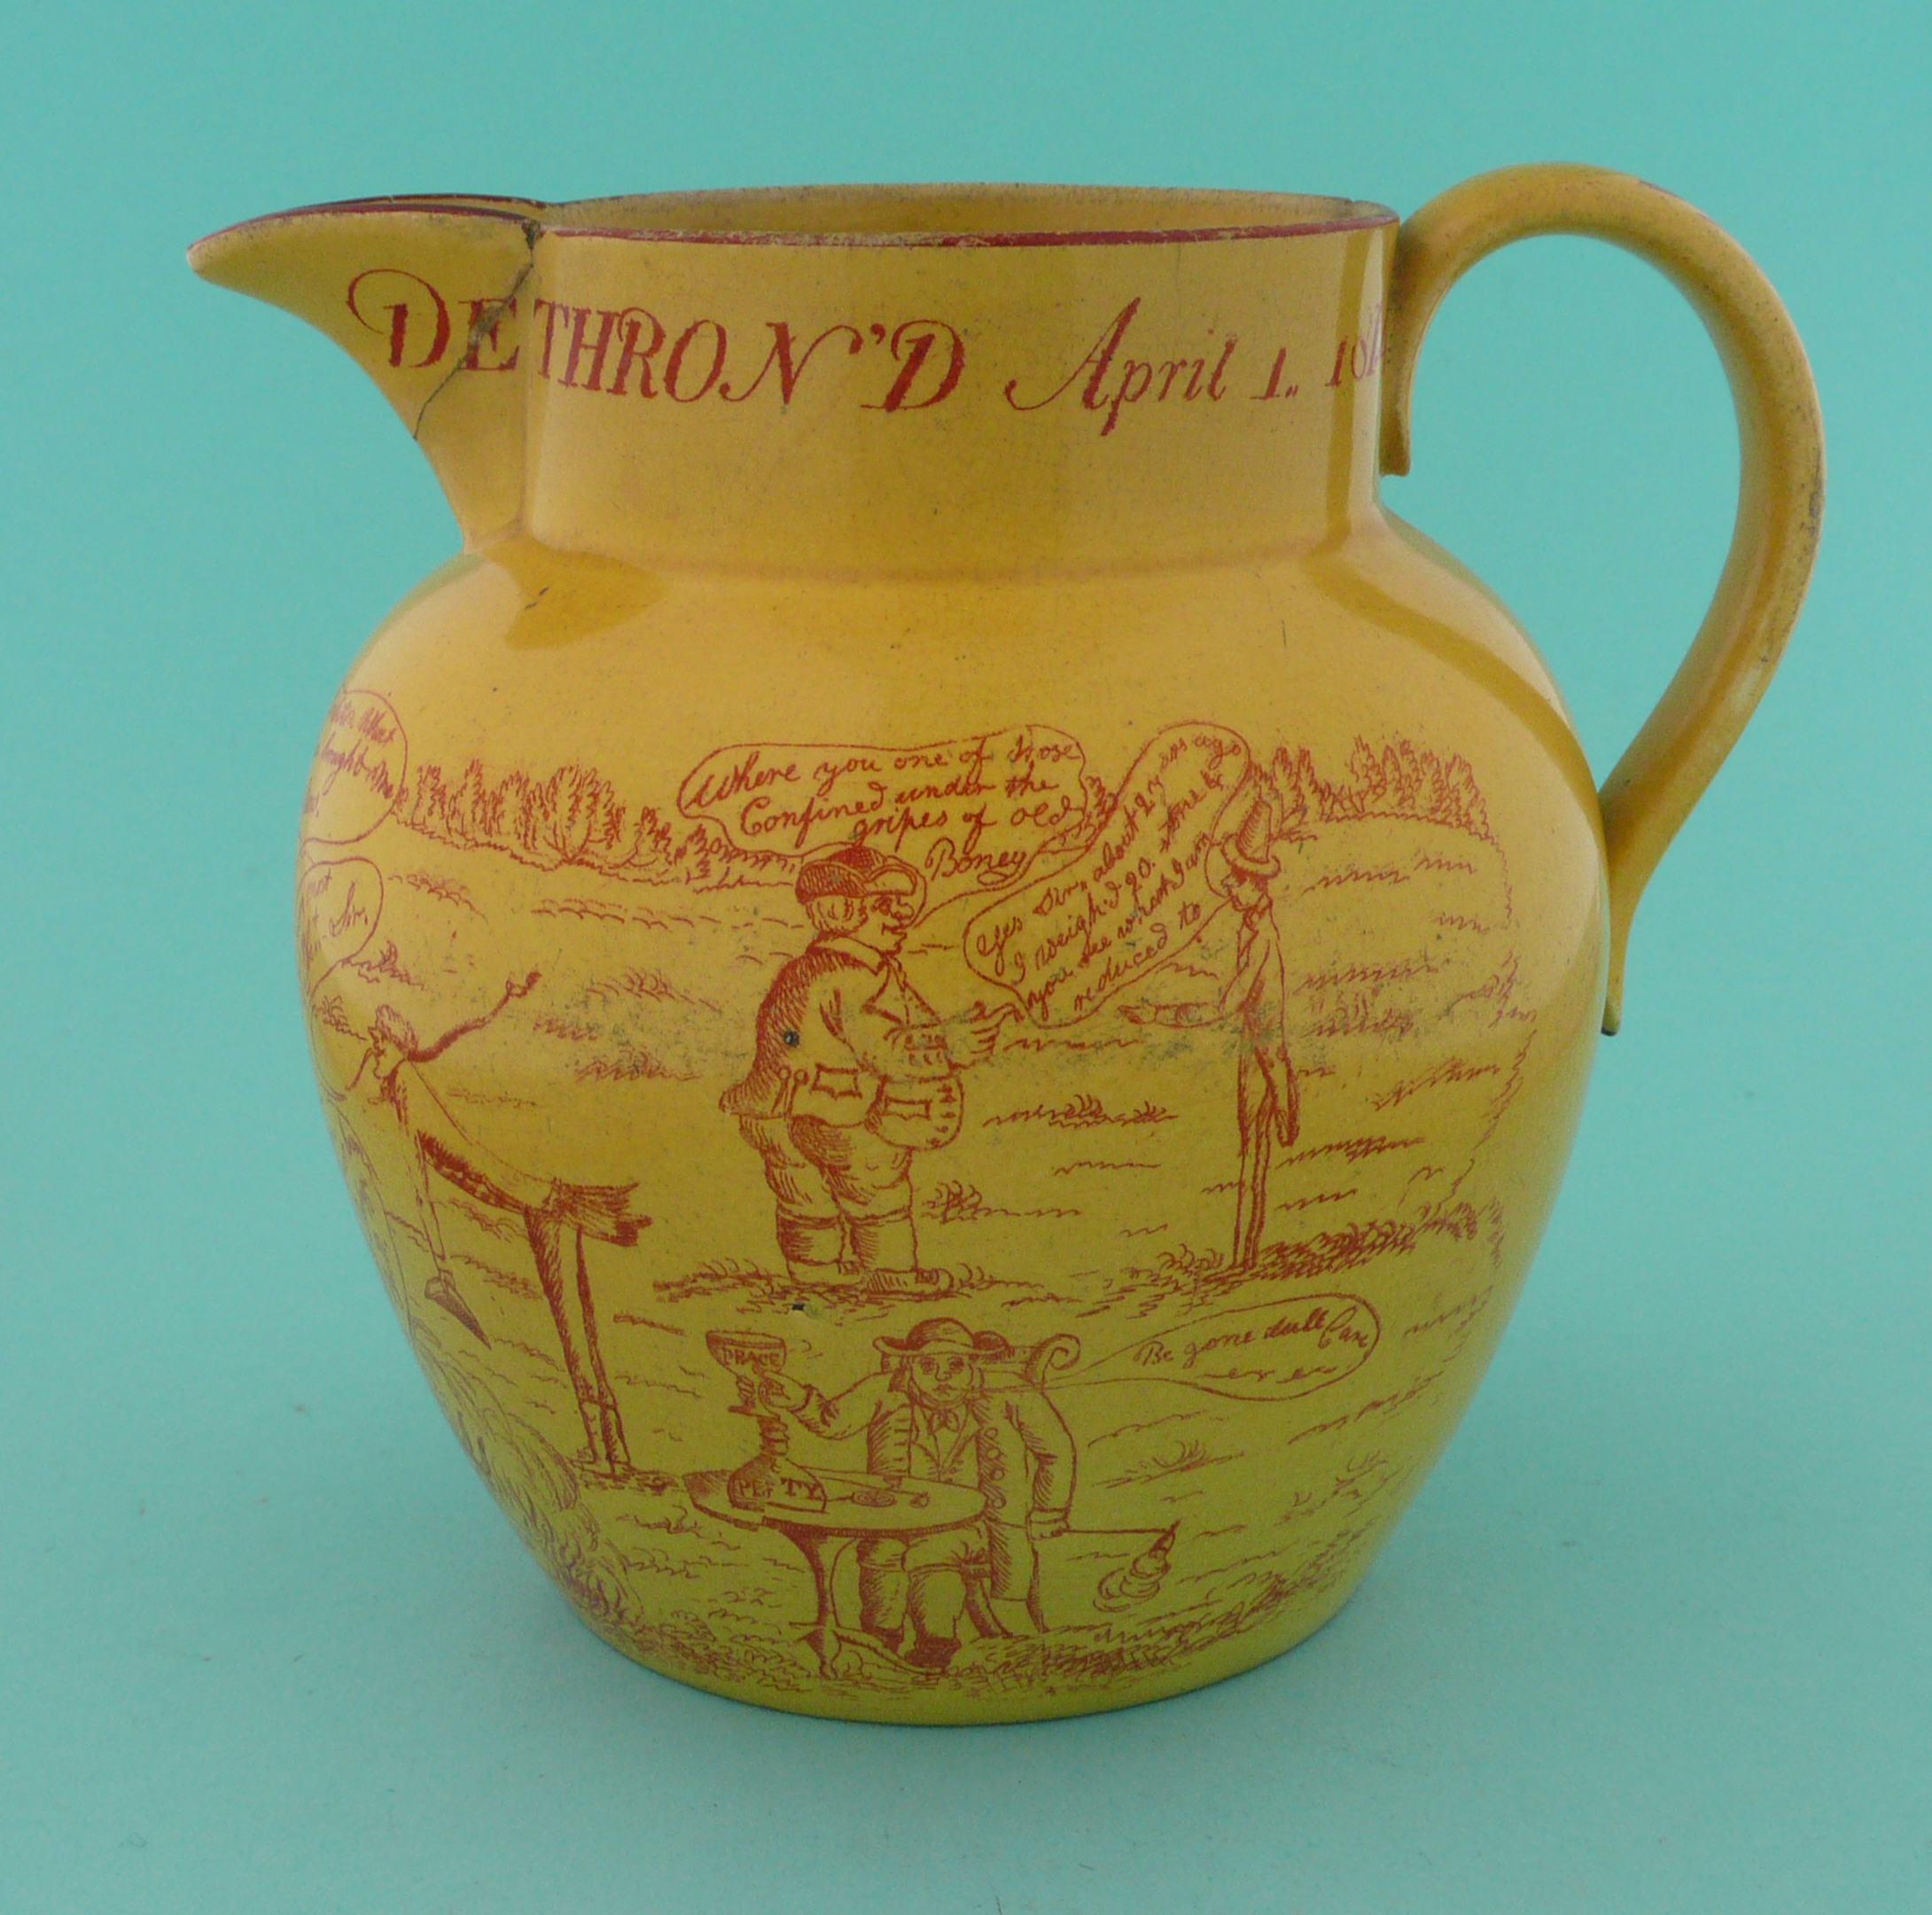 1814 Napoleon’s Abdication: a yellow ground jug printed in rouge-de-fer with an extensive titled